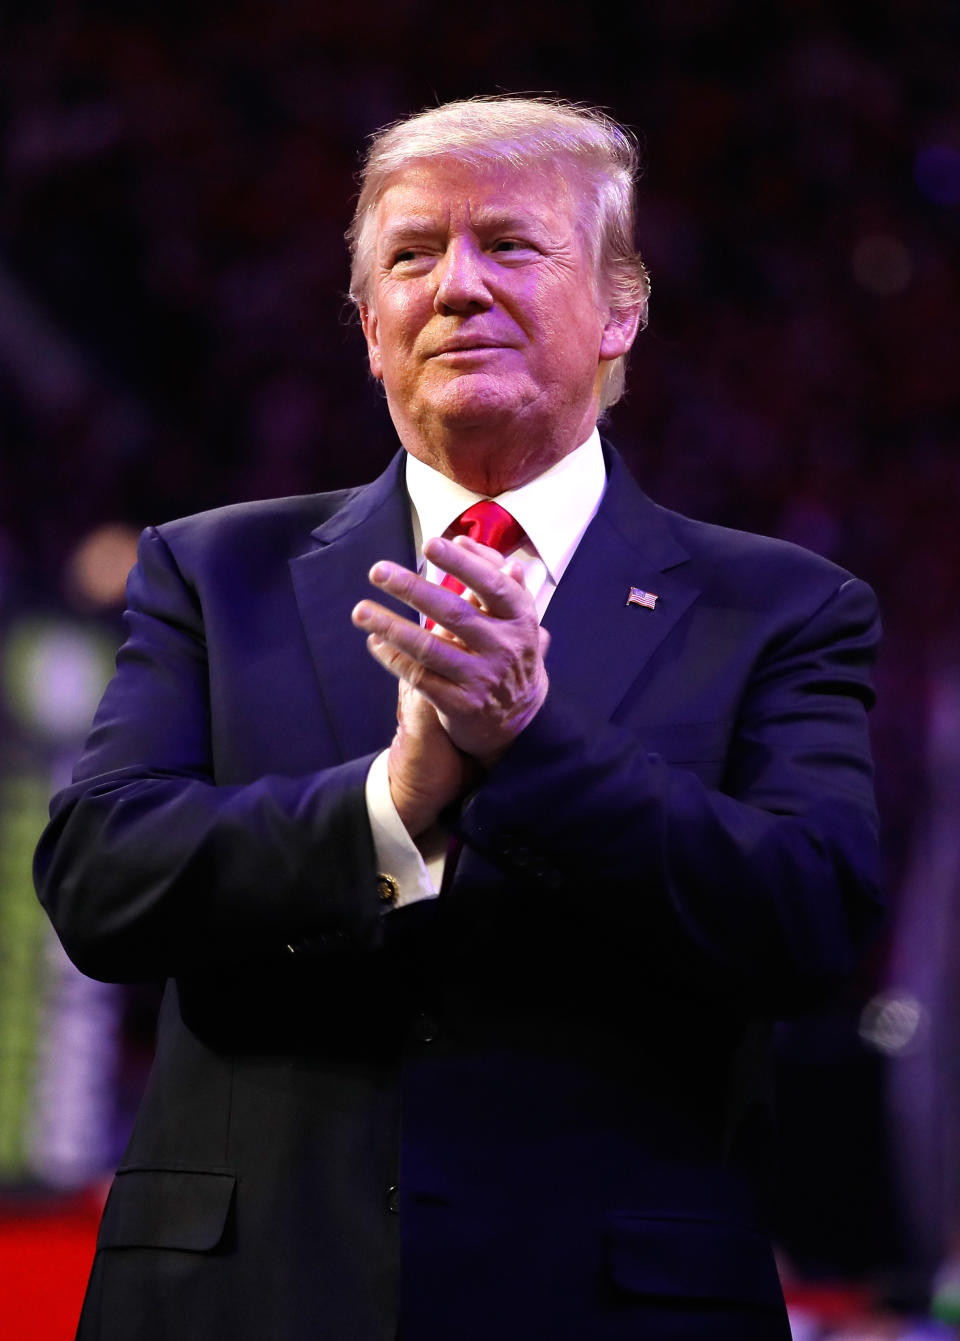 <p>U.S. President Donald Trump on field during the national anthem prior to the CFP National Championship presented by AT&T between the Georgia Bulldogs and the Alabama Crimson Tide at Mercedes-Benz Stadium on January 8, 2018 in Atlanta, Georgia. (Photo by Jamie Squire/Getty Images) </p>